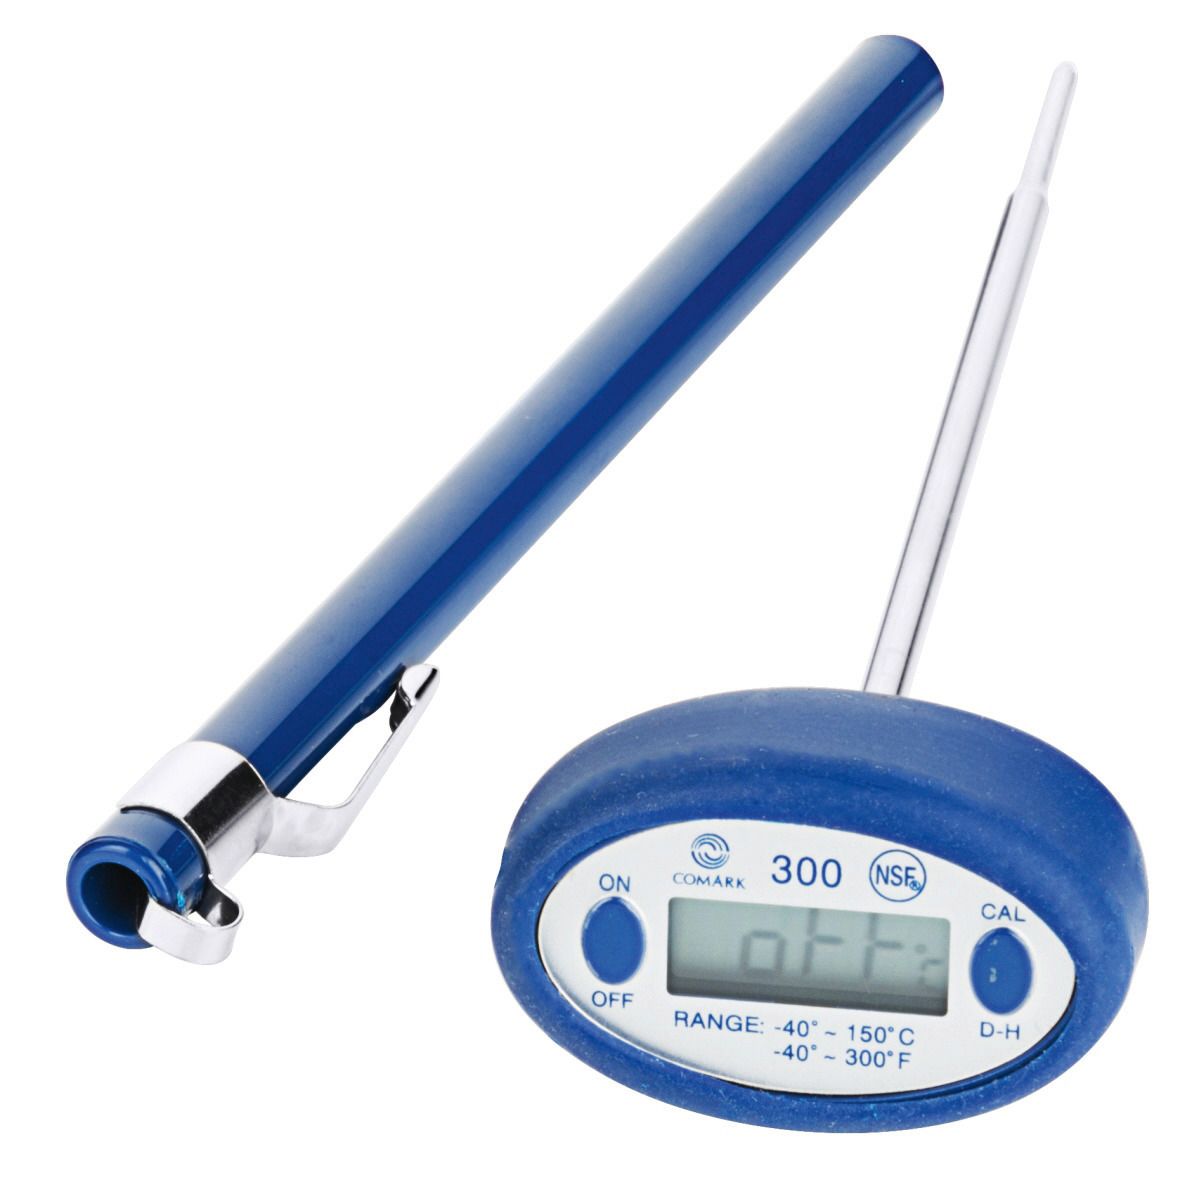 Mini-Einstech-Thermometer 150 mm lang